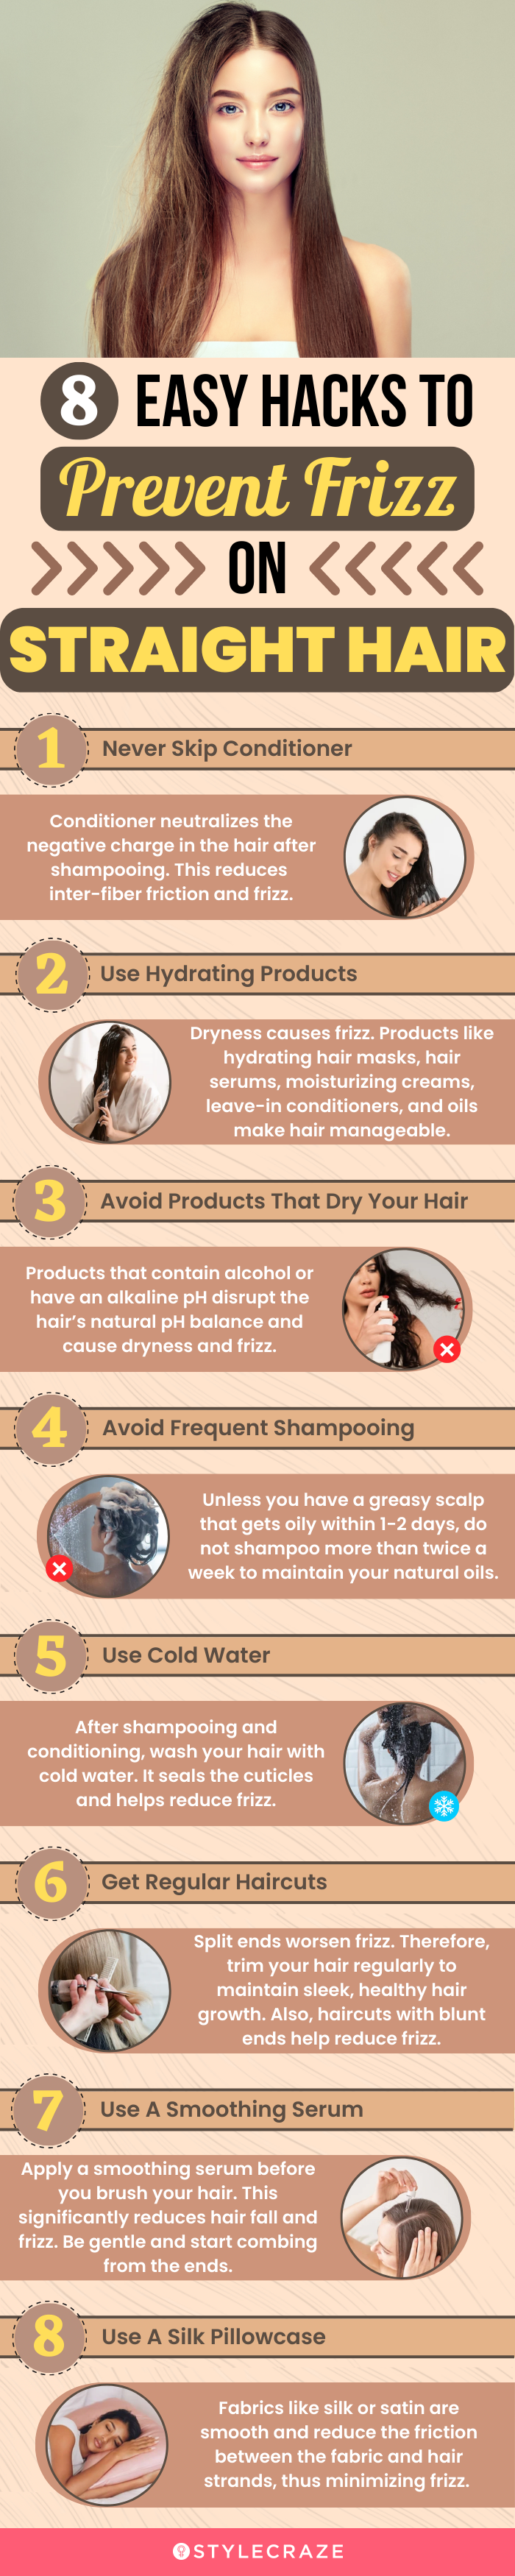 How To Fix Frizzy Straight Hair  